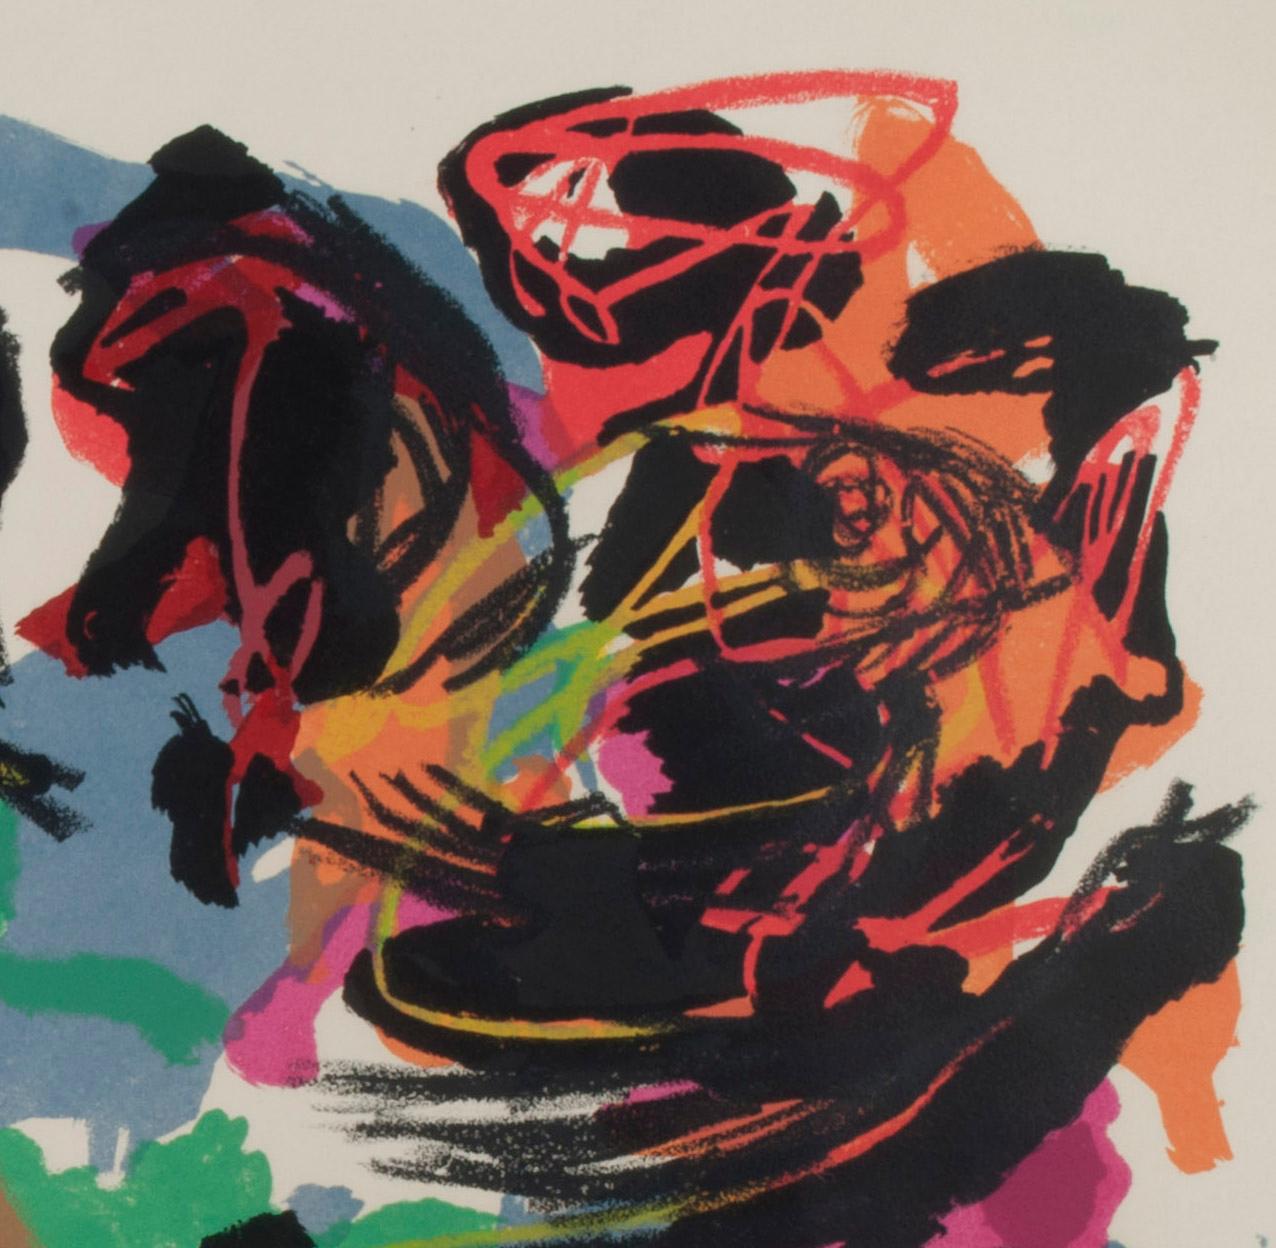 Drole de Drame - Abstract Print by Karel Appel